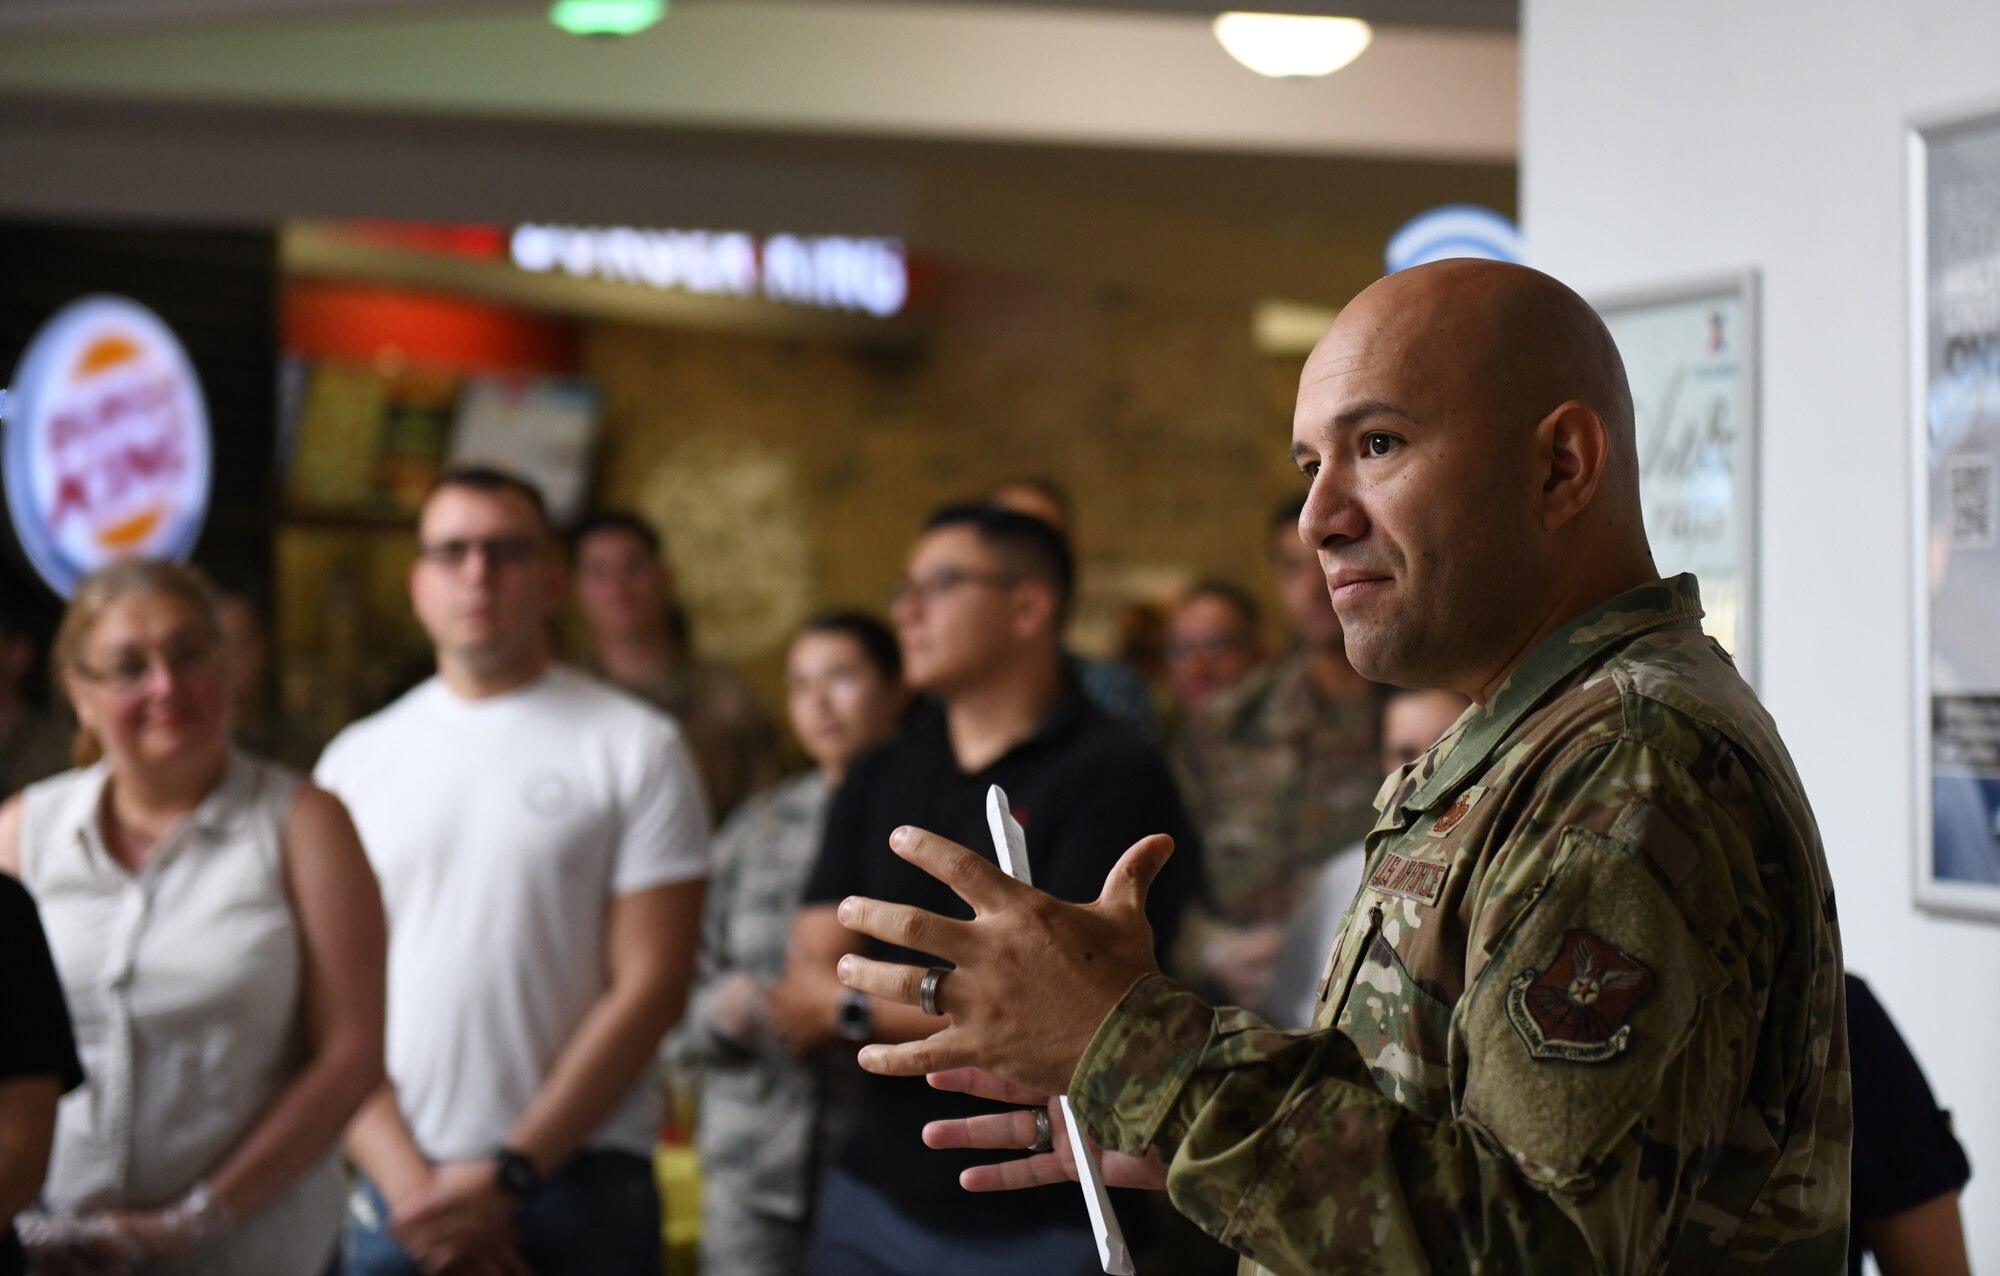 Maj. Jose Crespo, the 28th Logistics Readiness Squadron commander, delivers opening remarks at the ‘Taste of Latin America’ food tasting event, held at the Base Exchange food court, on Ellsworth Air Force Base, S.D., Sept. 16, 2019. Crespo spoke about the many accomplishments and contributions of Hispanic and Latin American service members throughout history, as well as the diversity found amongst Latino communities. (U.S. Air Force photo by Airman 1st Class Christina Bennett)